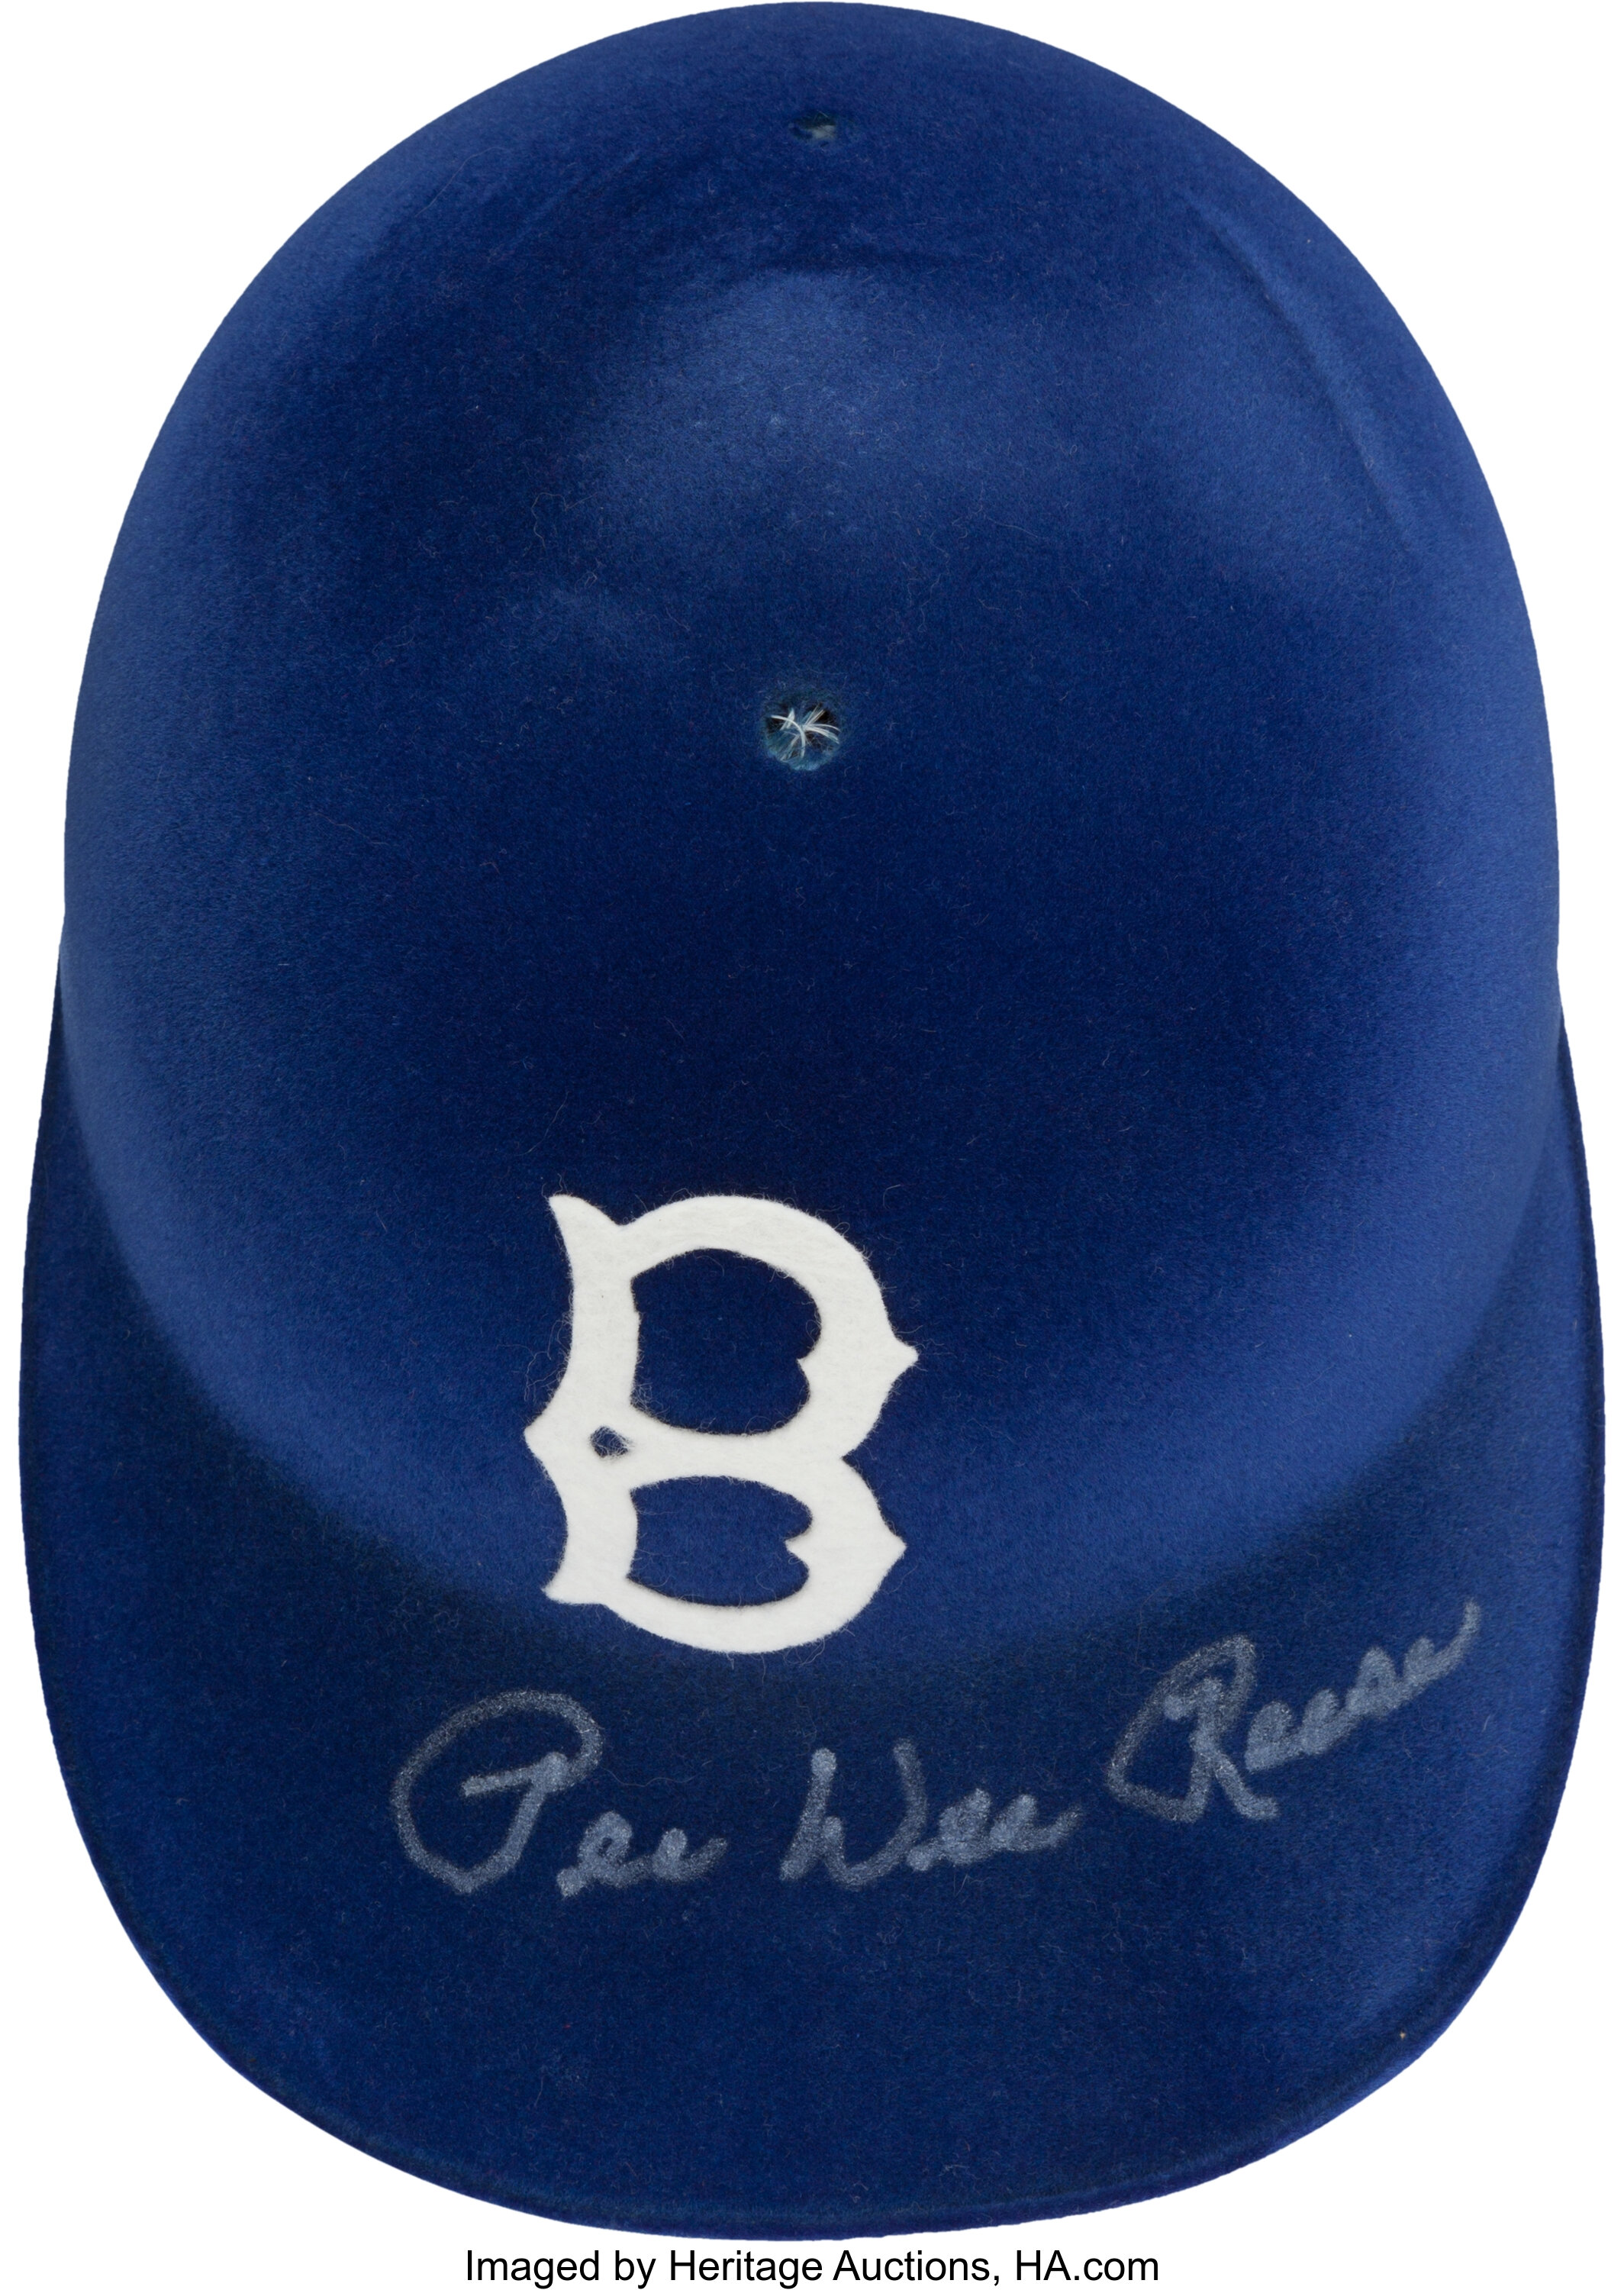 Brooklyn Dodgers Authentic Southland Pee Wee Reese Double Knit Je